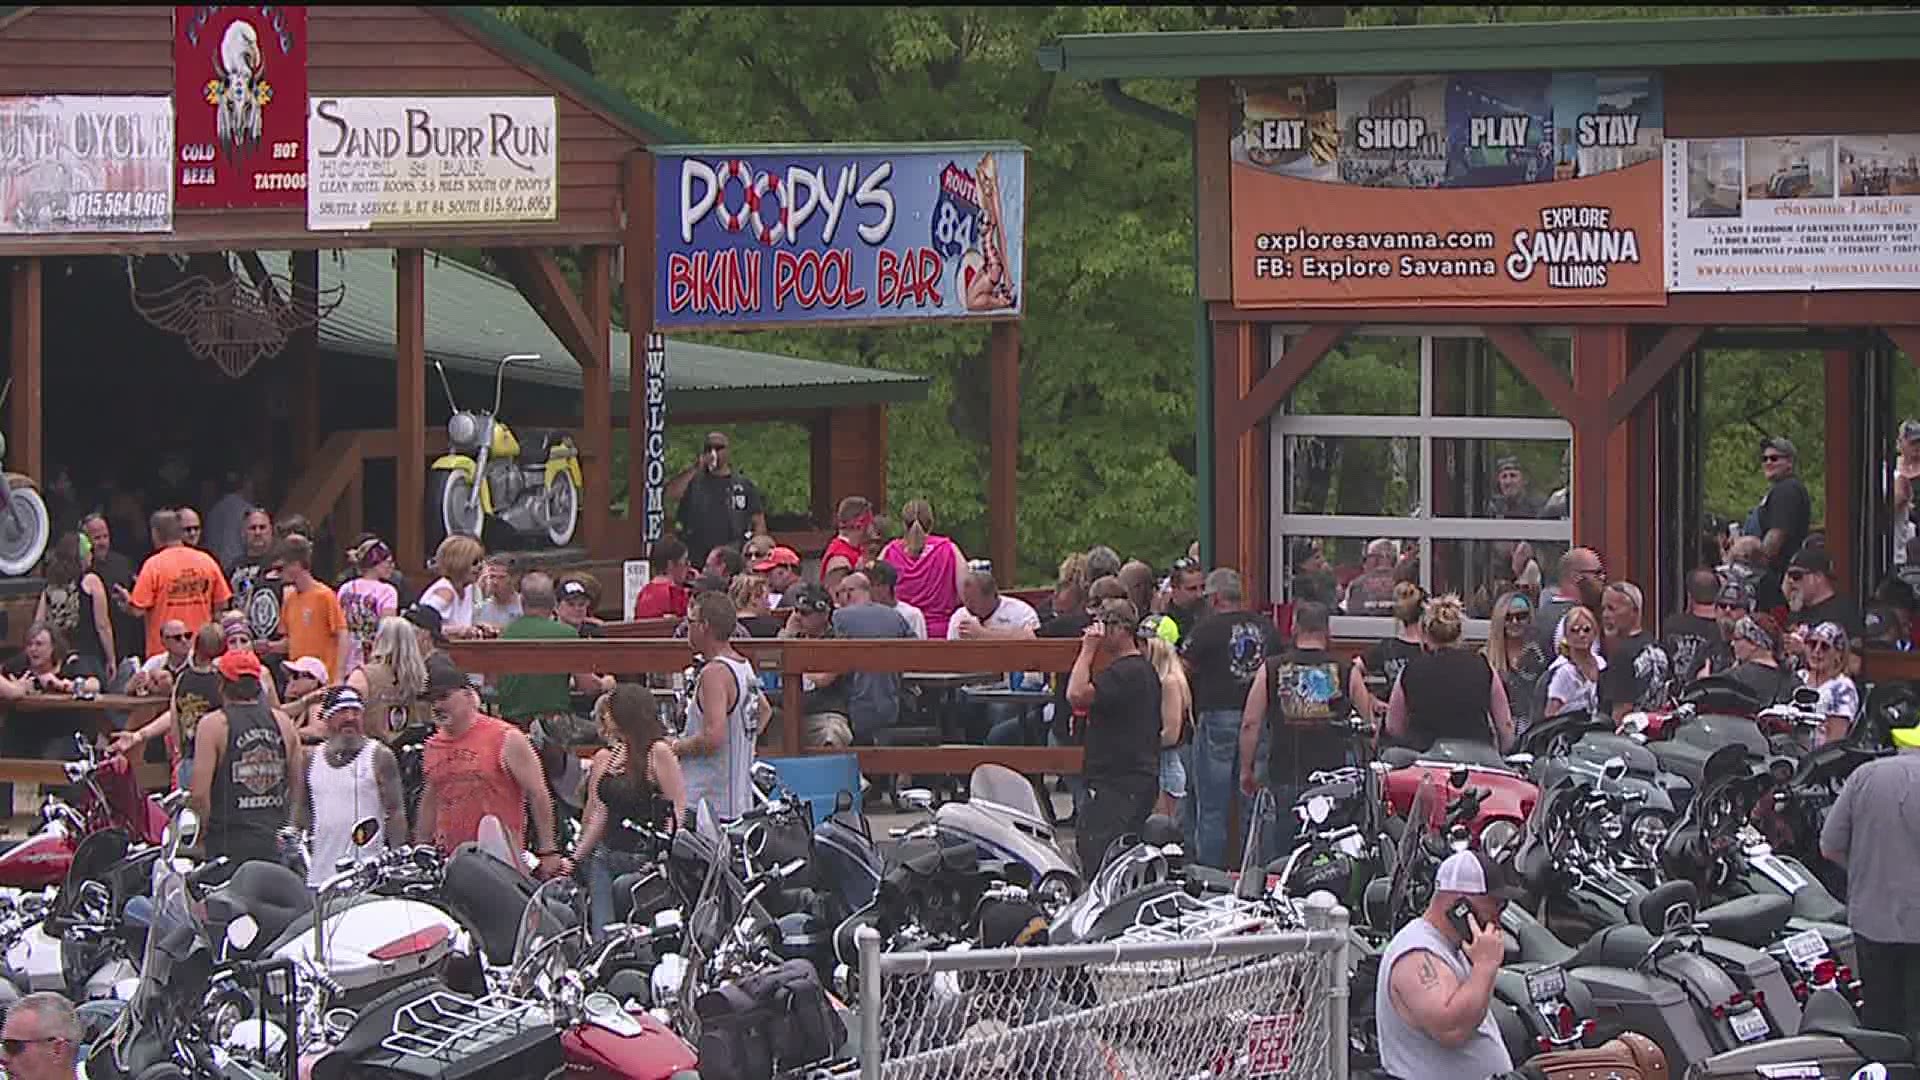 As hundreds of revelers disregard social distancing guidelines, the owner of Poopy's Pub says "I'm not trying to be an outlaw."